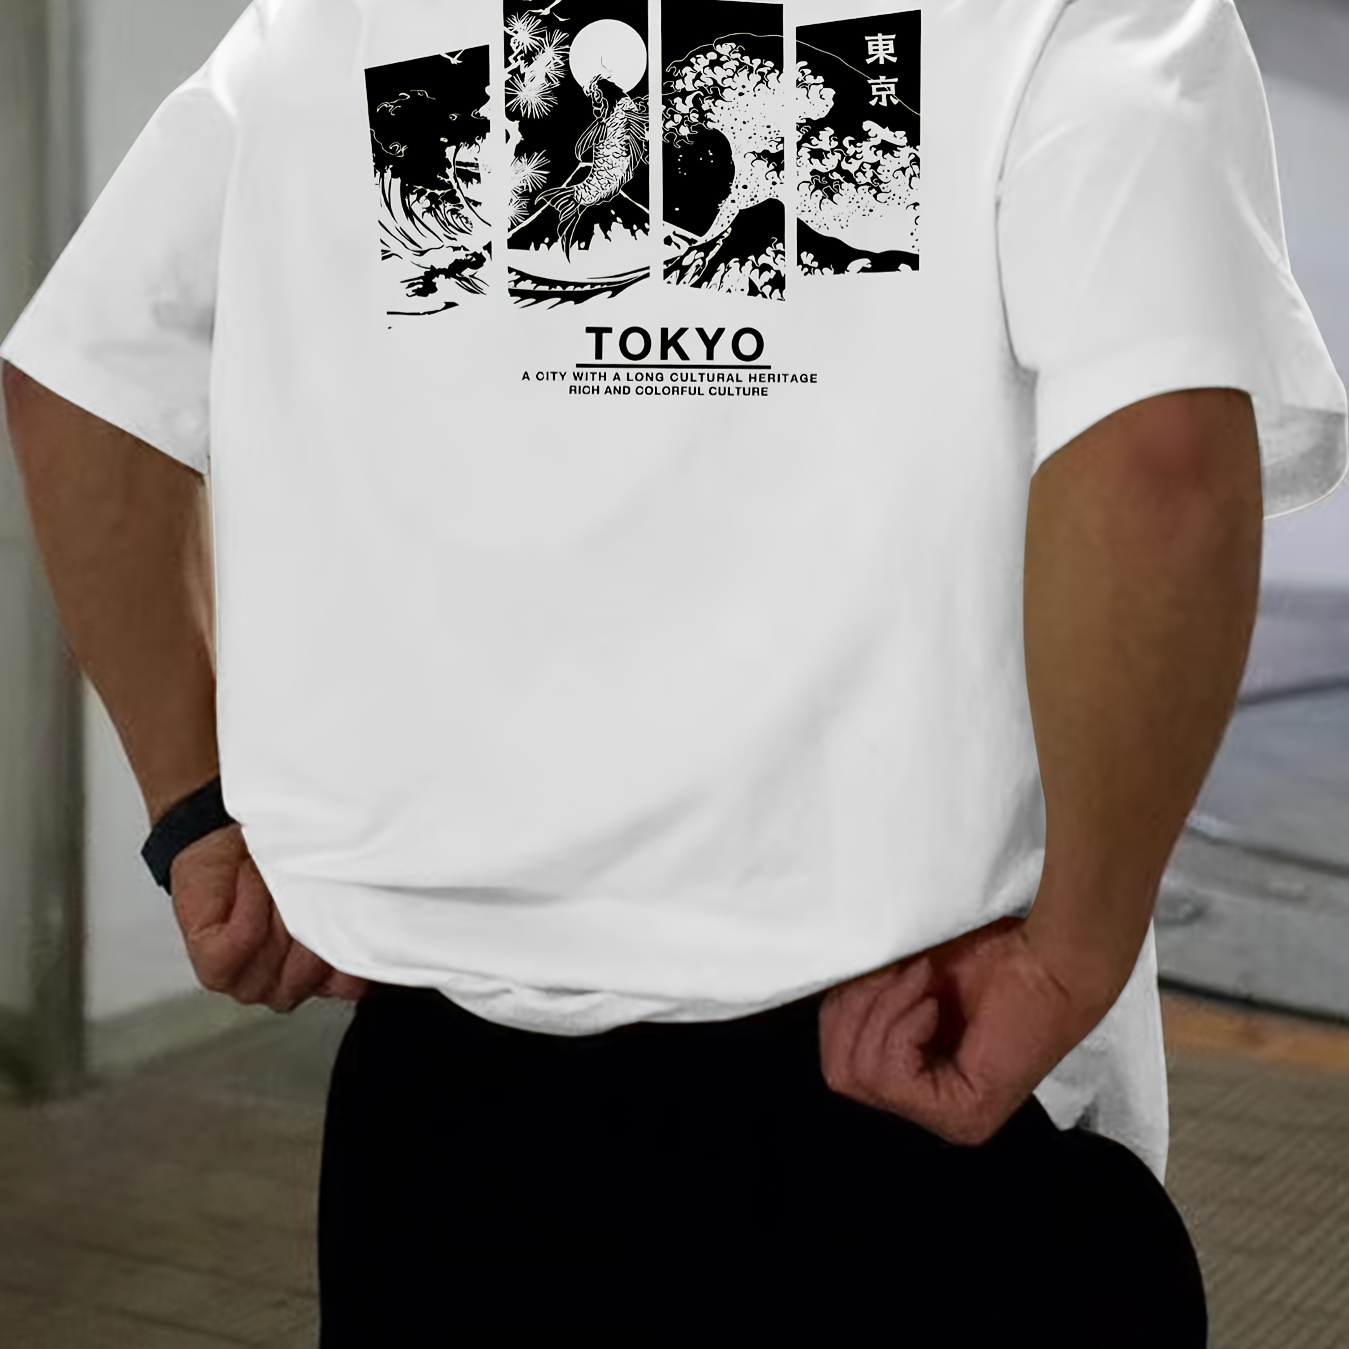 

Tokyo "creative Print Casual Novelty T-shirt For Men, Short Sleeve Summer& Spring Top, Comfort Fit, Stylish Streetwear Crew Neck Tee For Daily Wear